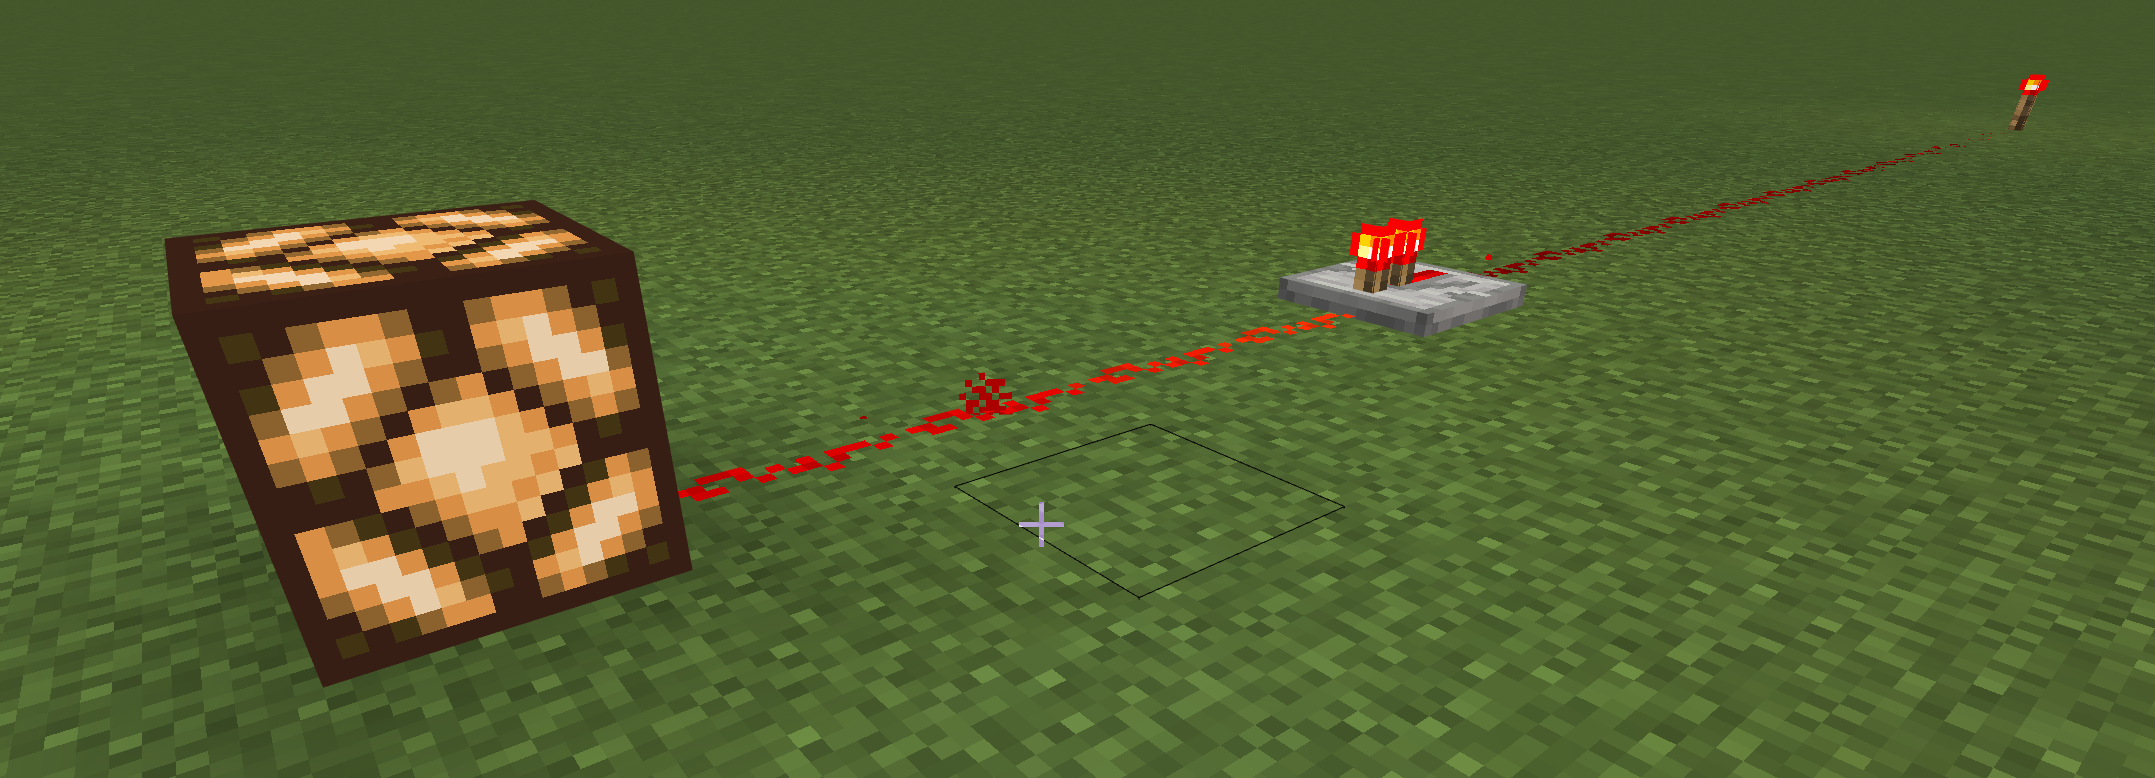 Image of a repeater extending a redstone signal.